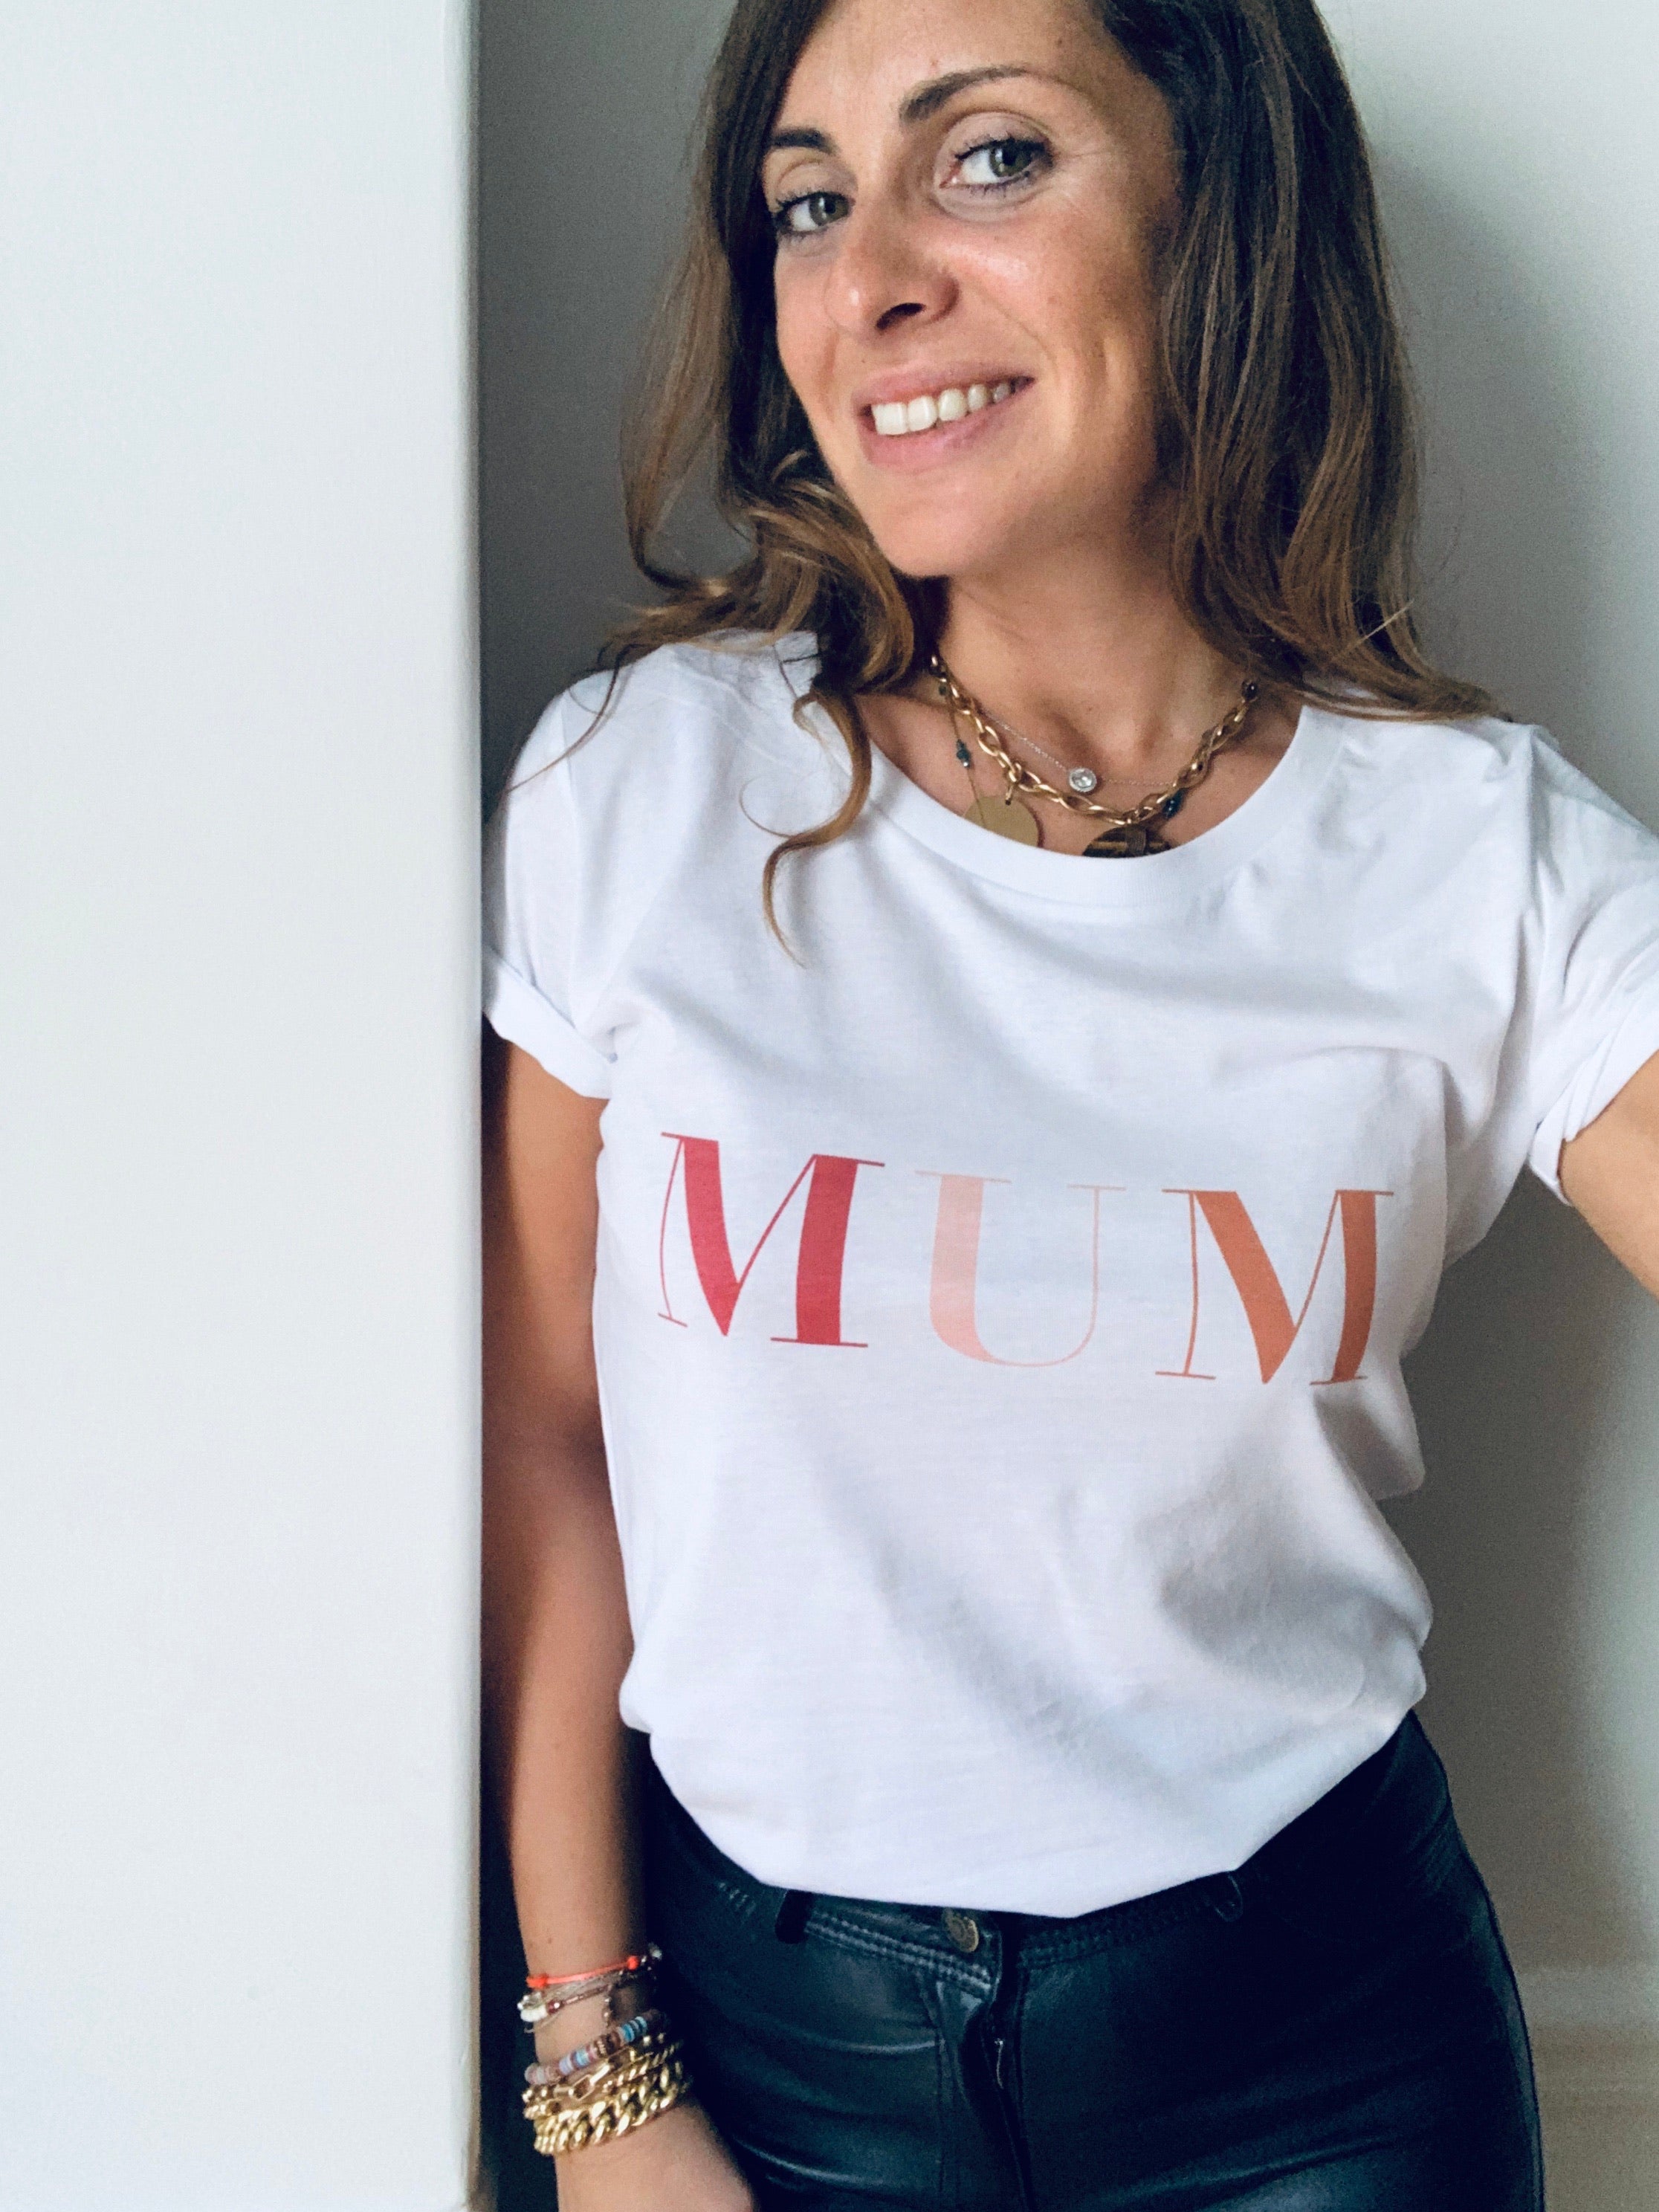 MUM OF SIX LIMITED EDITION T-SHIRT